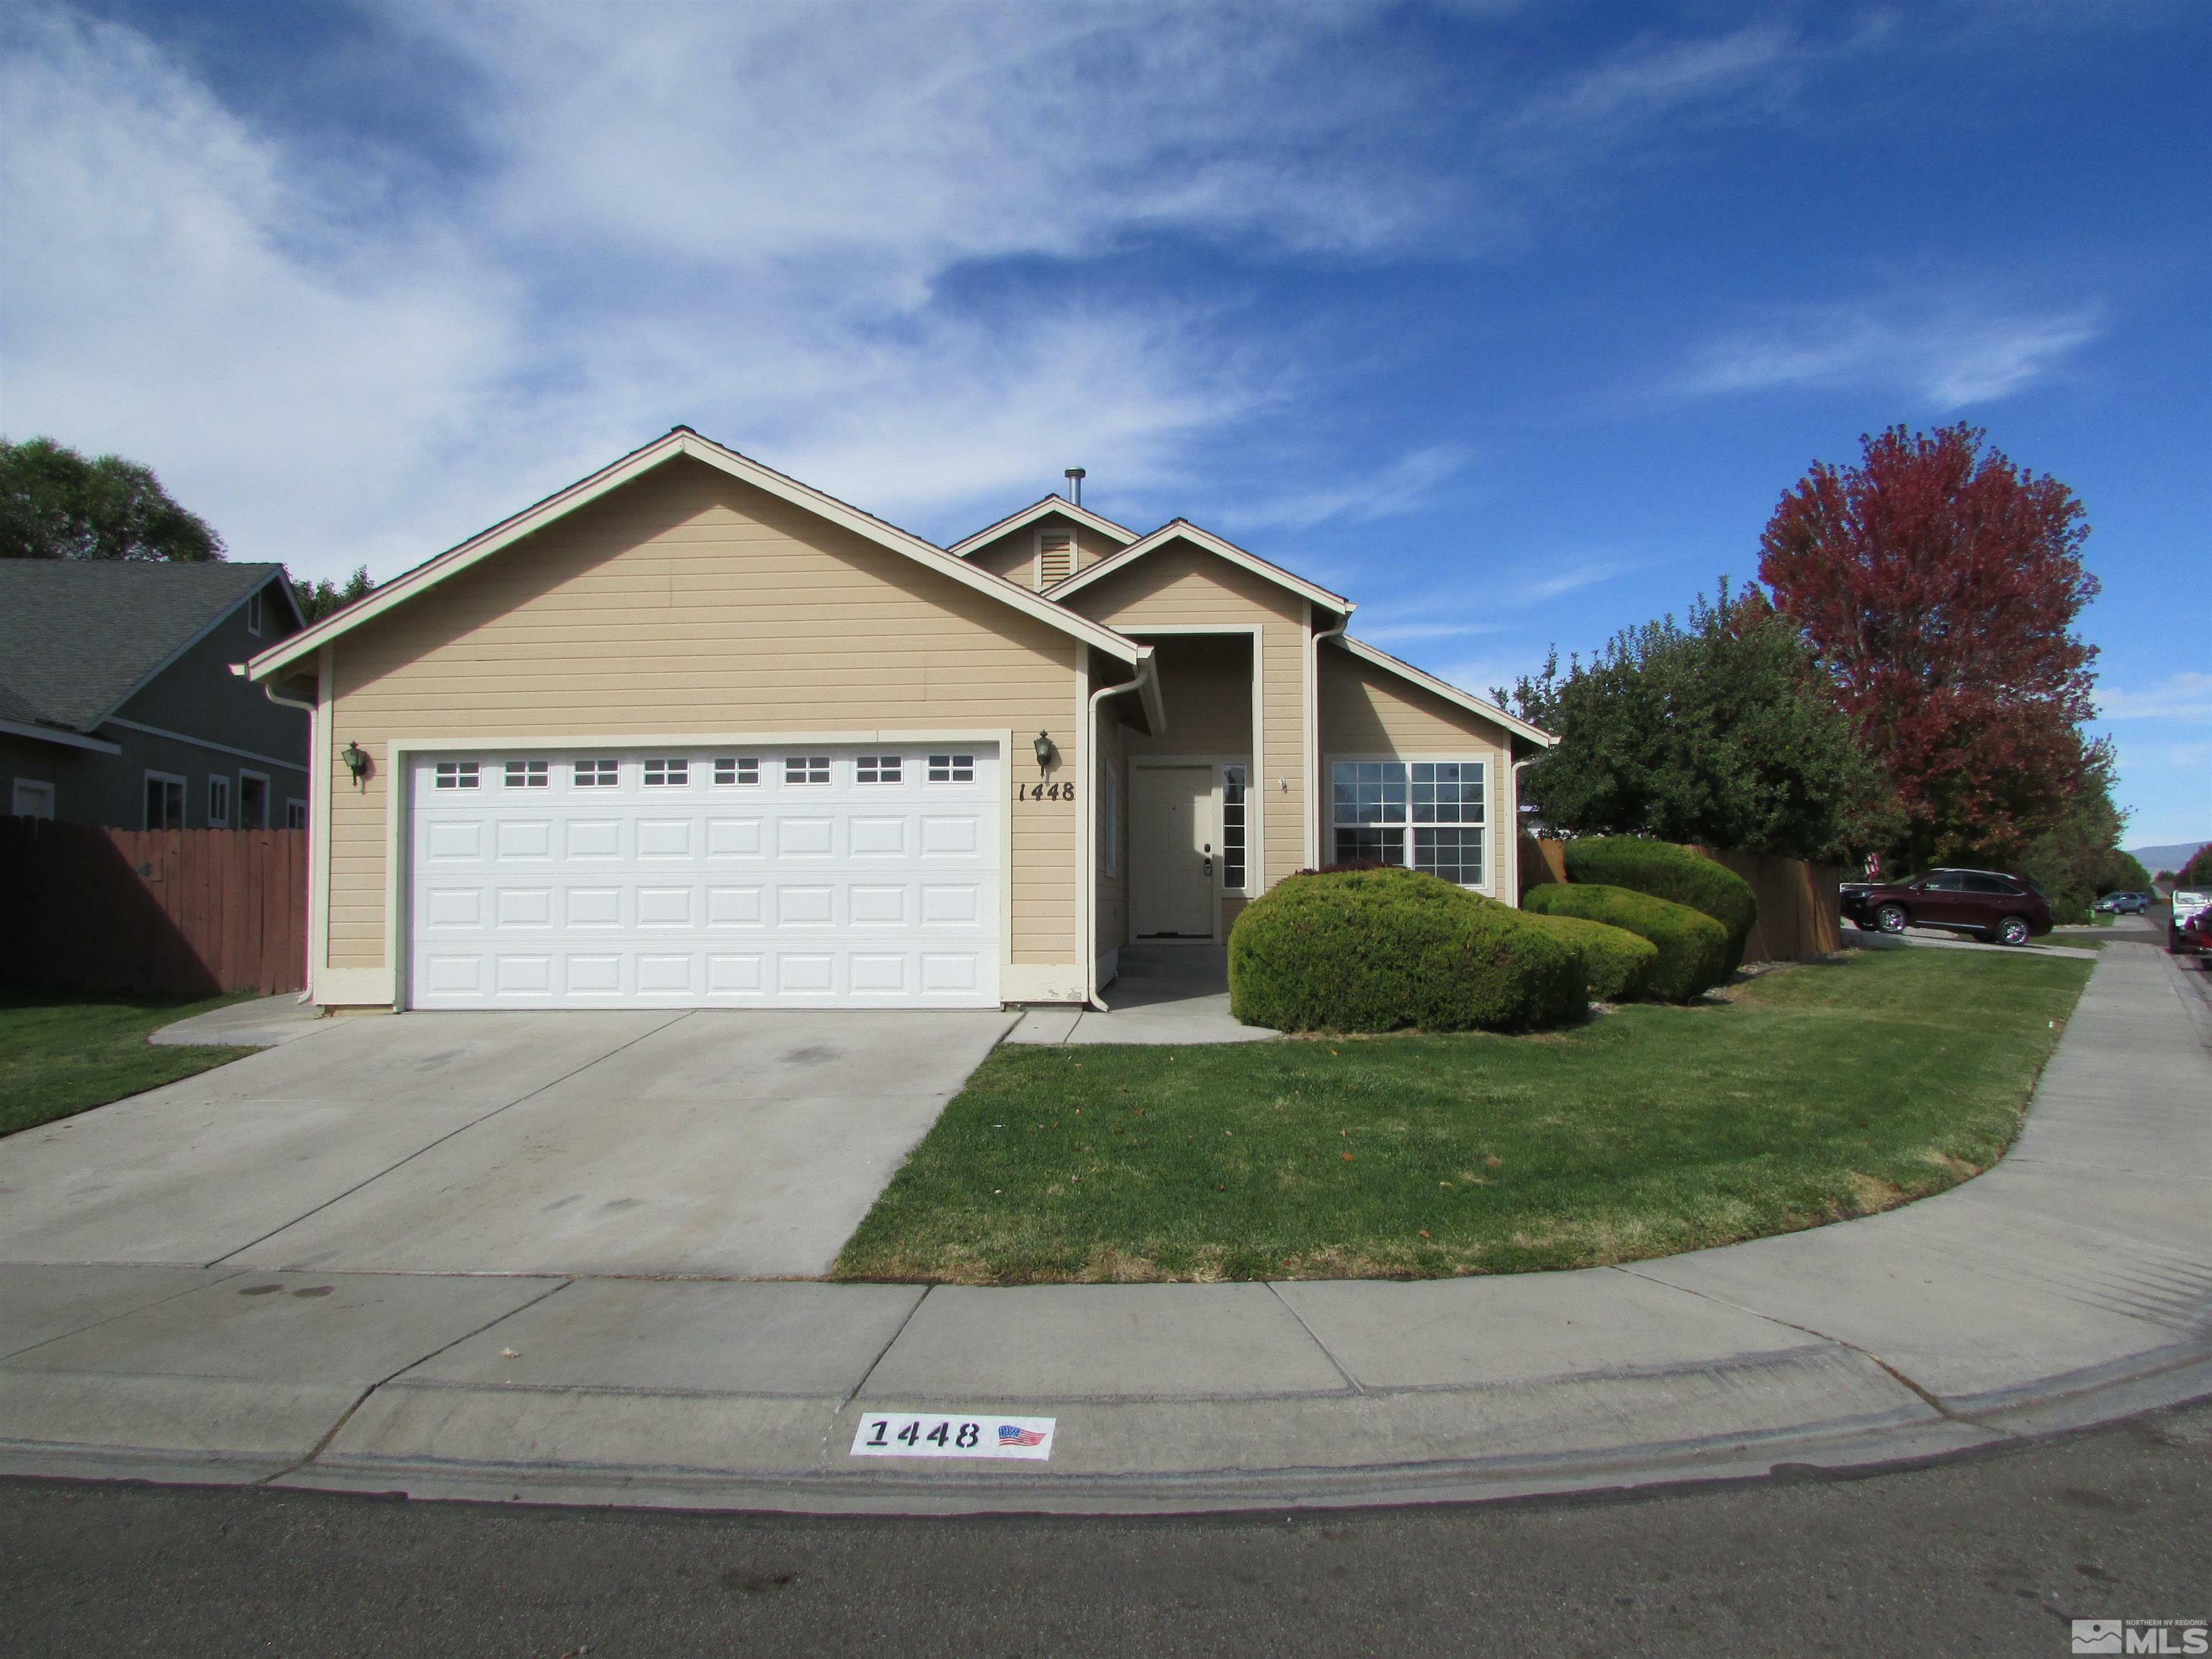 Property Photo:  1448 N Marion Russell Dr.  NV 89410 